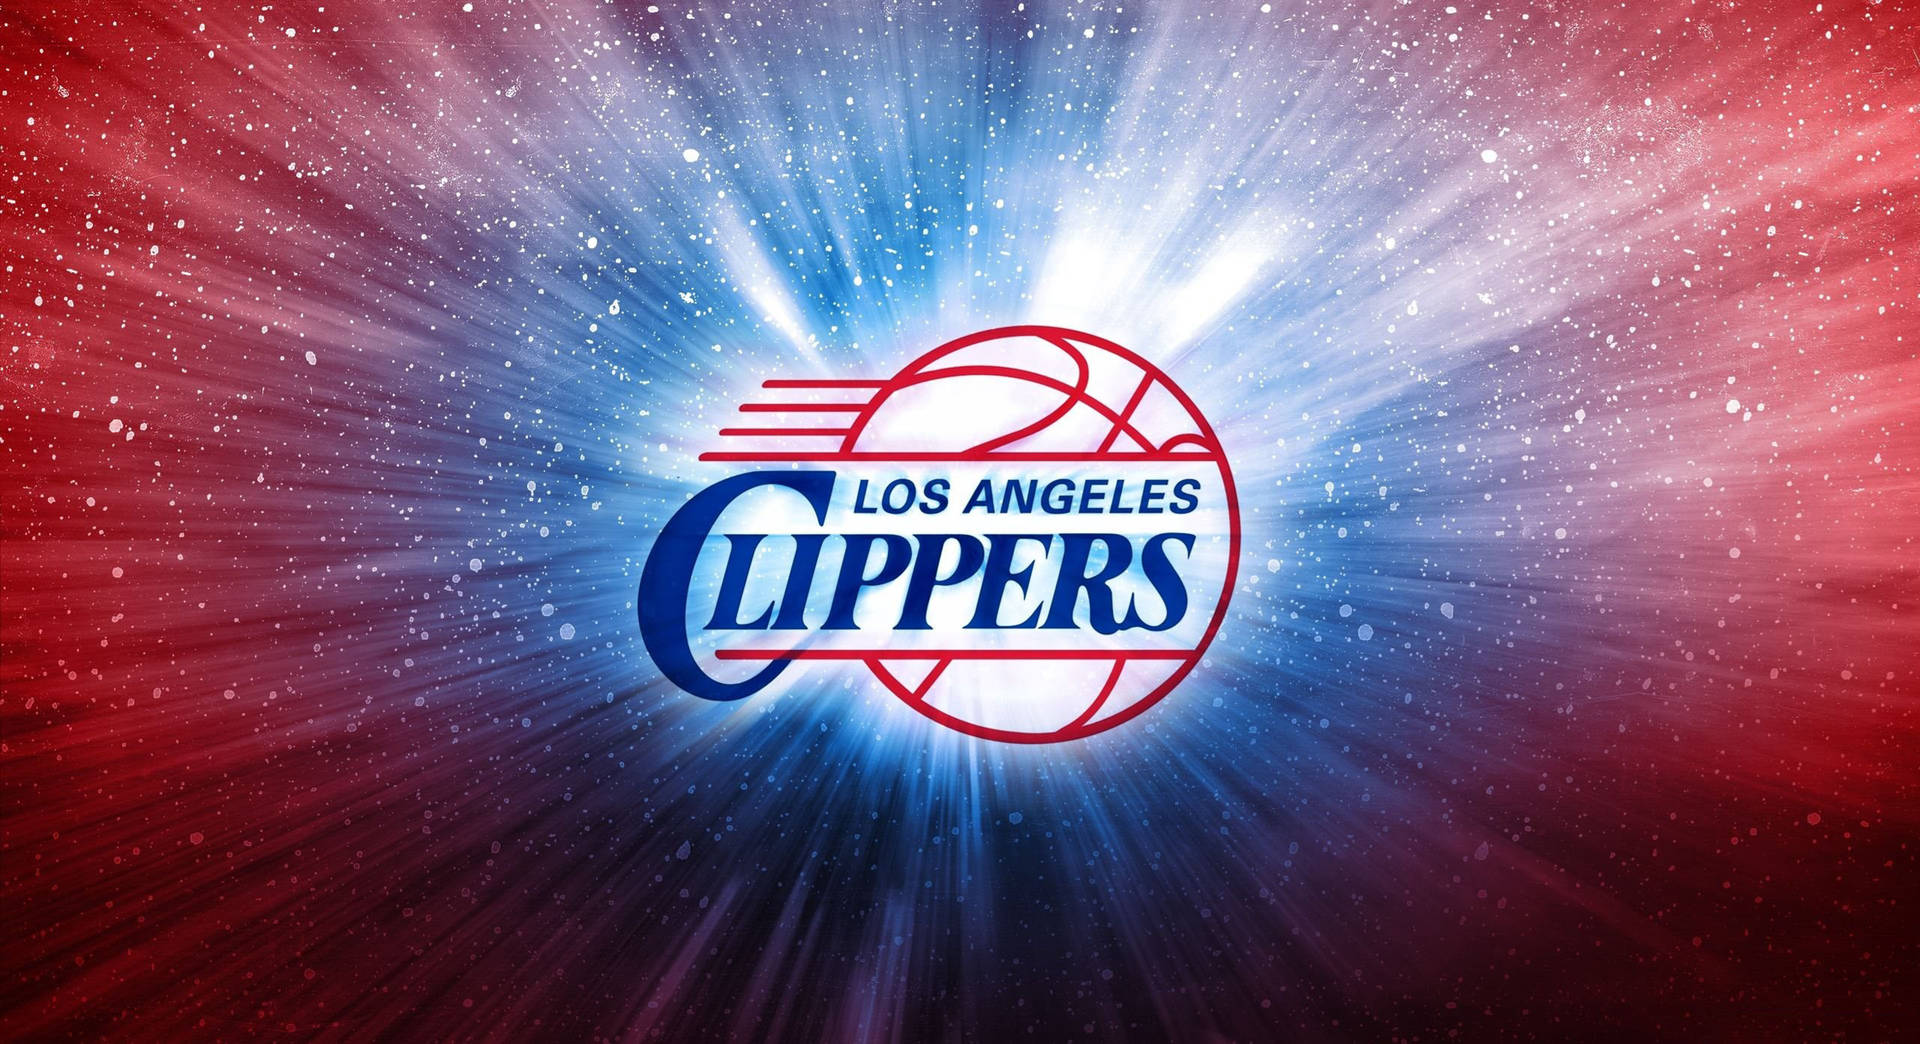 Free Los Angeles Clippers Wallpaper Downloads, Los Angeles Clippers Wallpaper for FREE